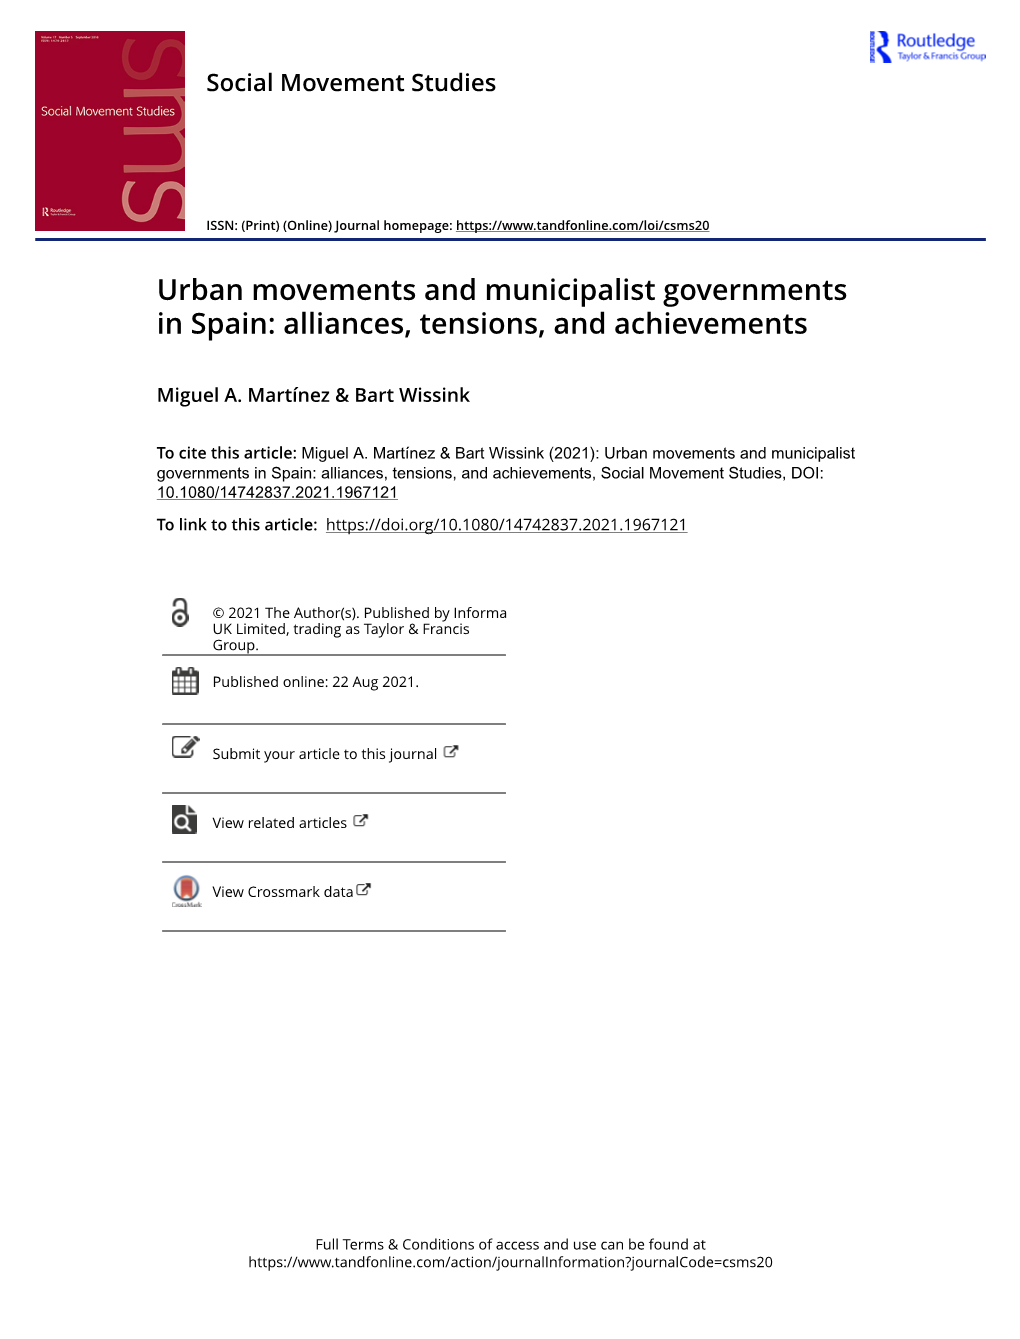 Urban Movements and Municipalist Governments in Spain: Alliances, Tensions, and Achievements